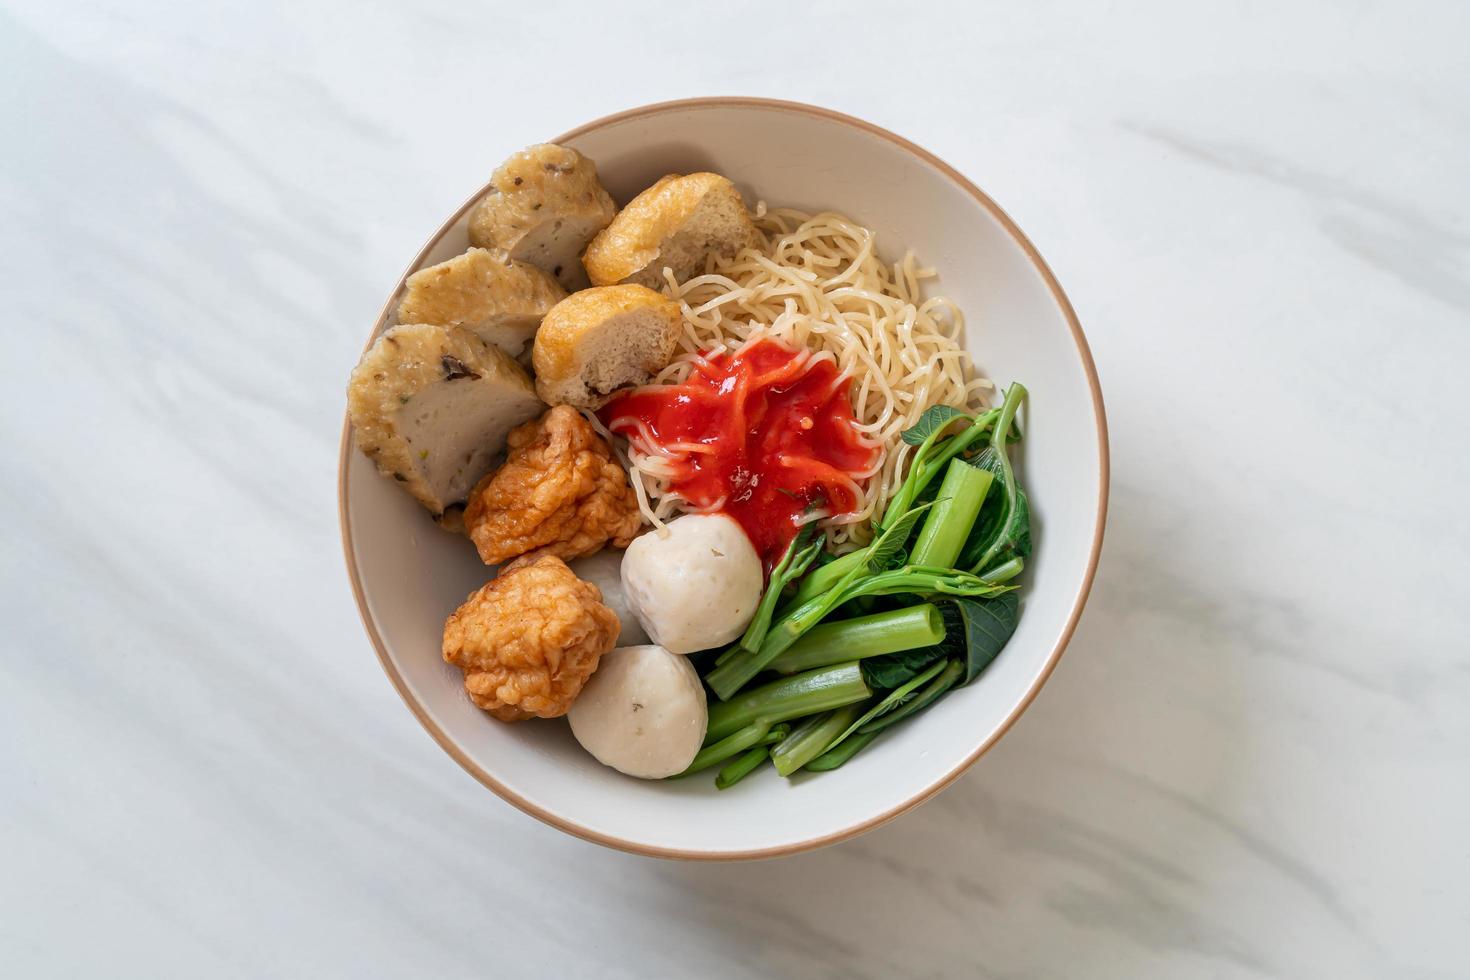 Egg noodles with fish balls and shrimp balls in pink sauce, Yen Ta Four or Yen Ta Fo - Asian food style photo